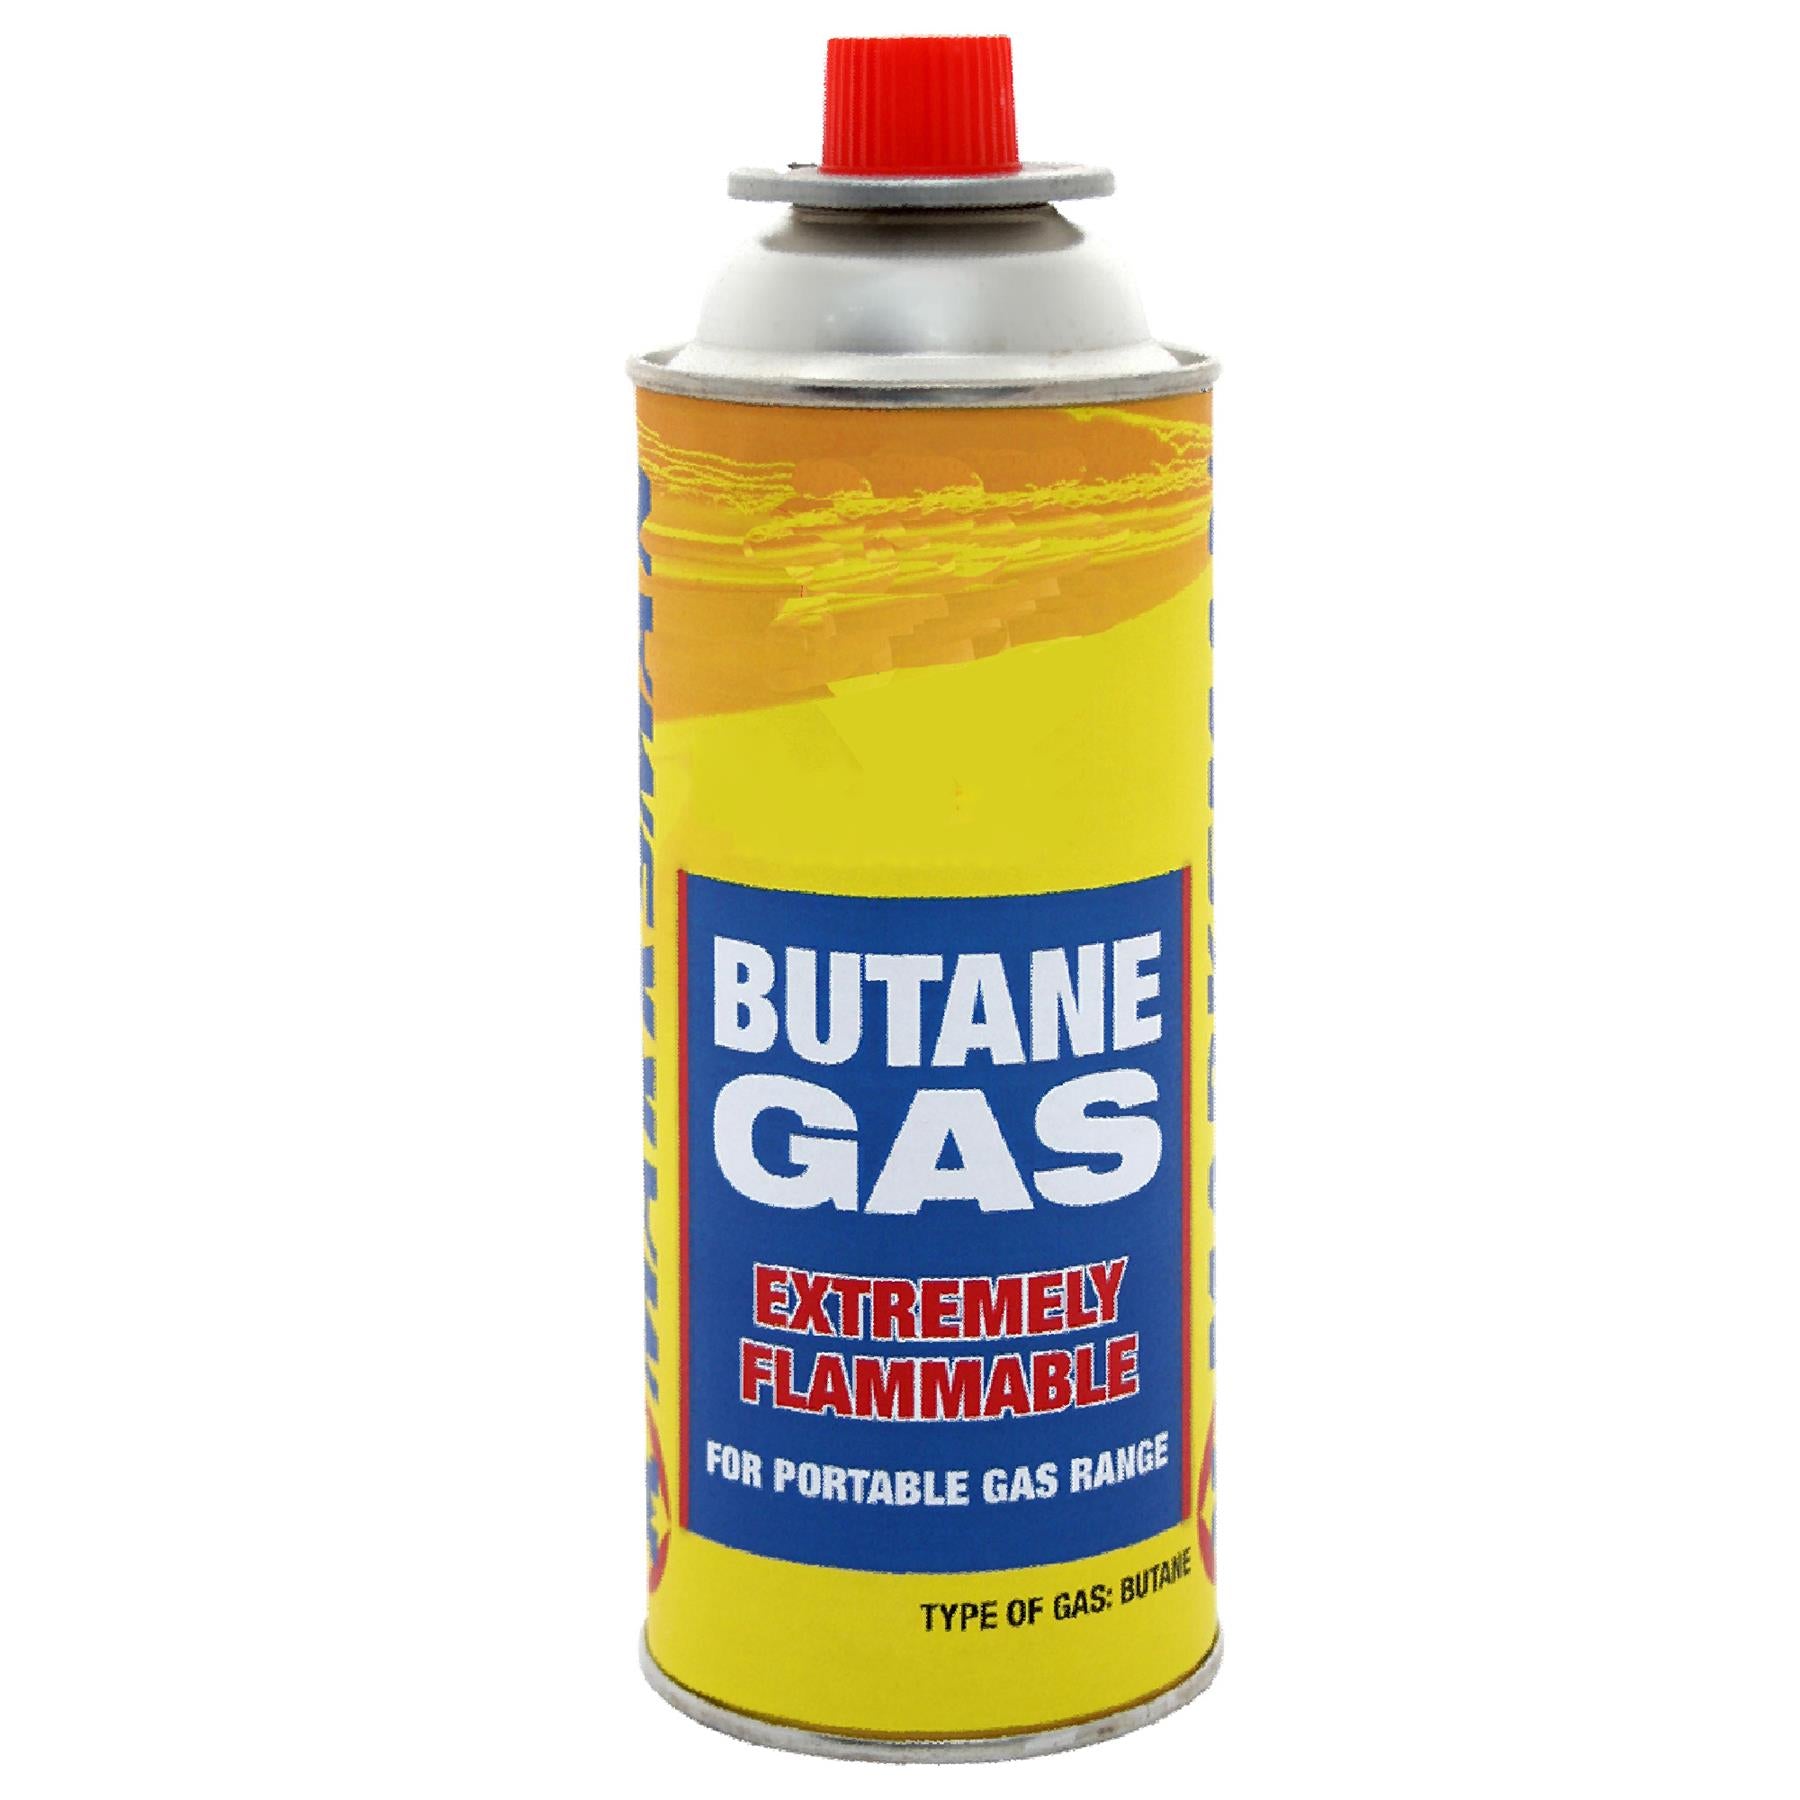 1 x Butane Gas Canisters Bottles For Camping Stoves Cookers Grill Weed Wand